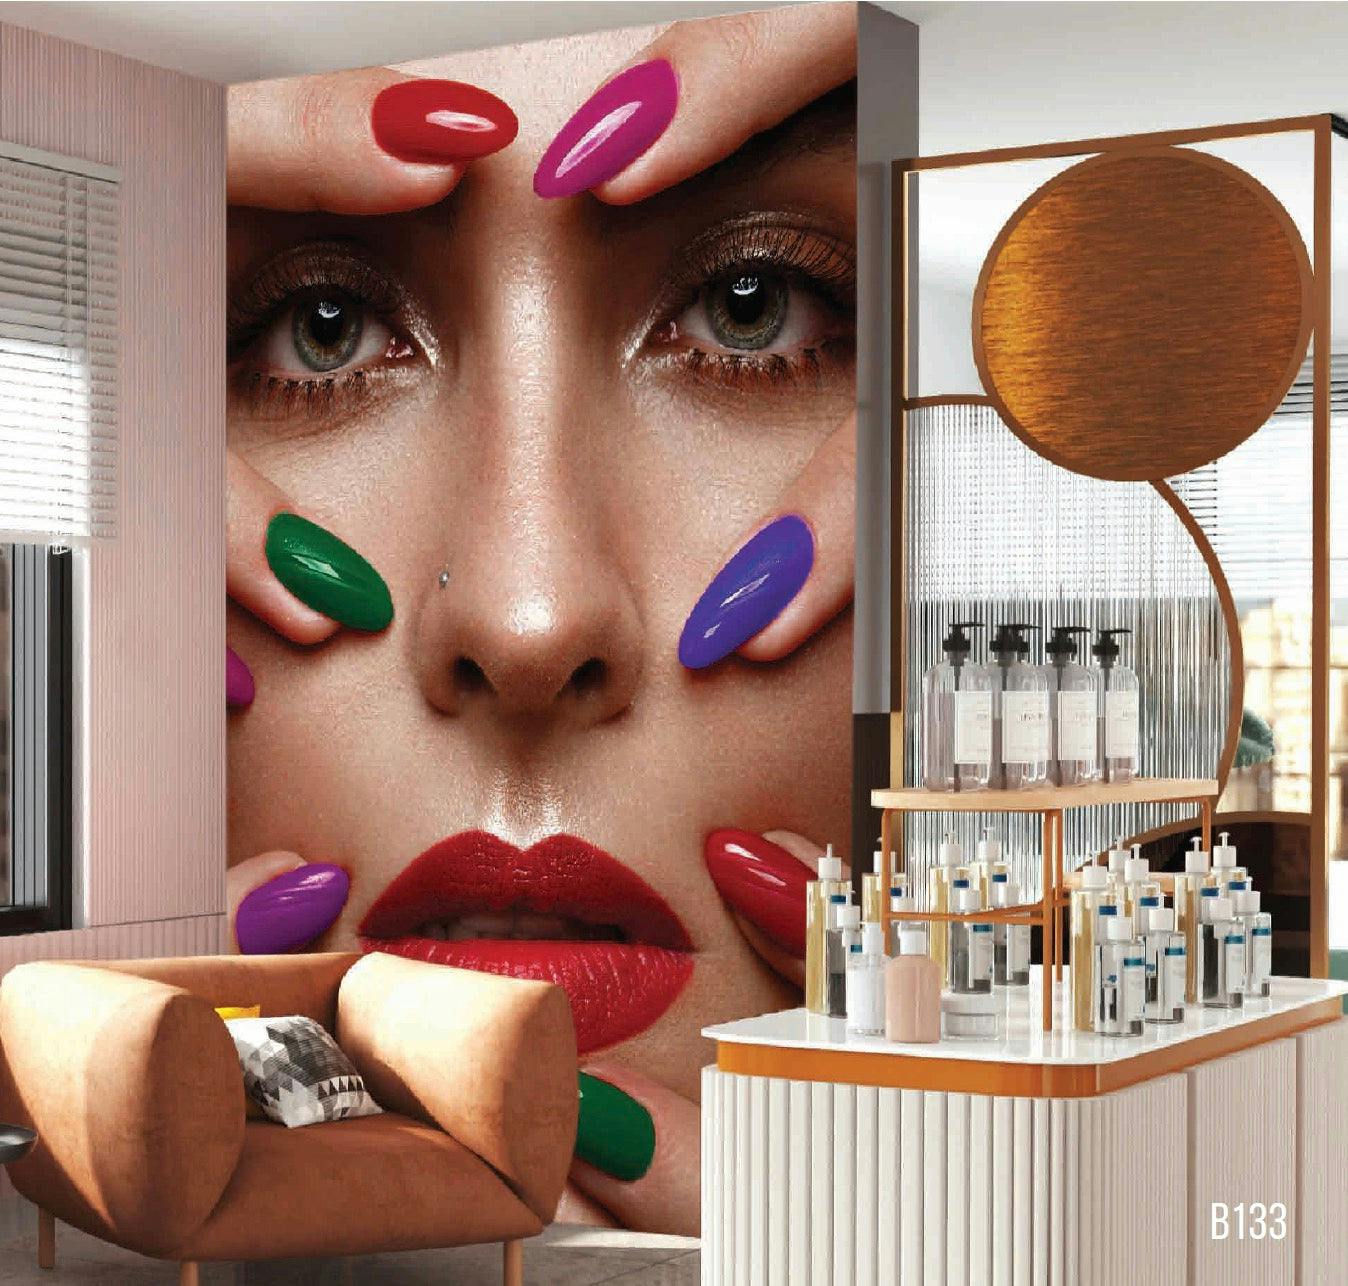 Lady's Face Mural with Vibrant Nail Polish Colors